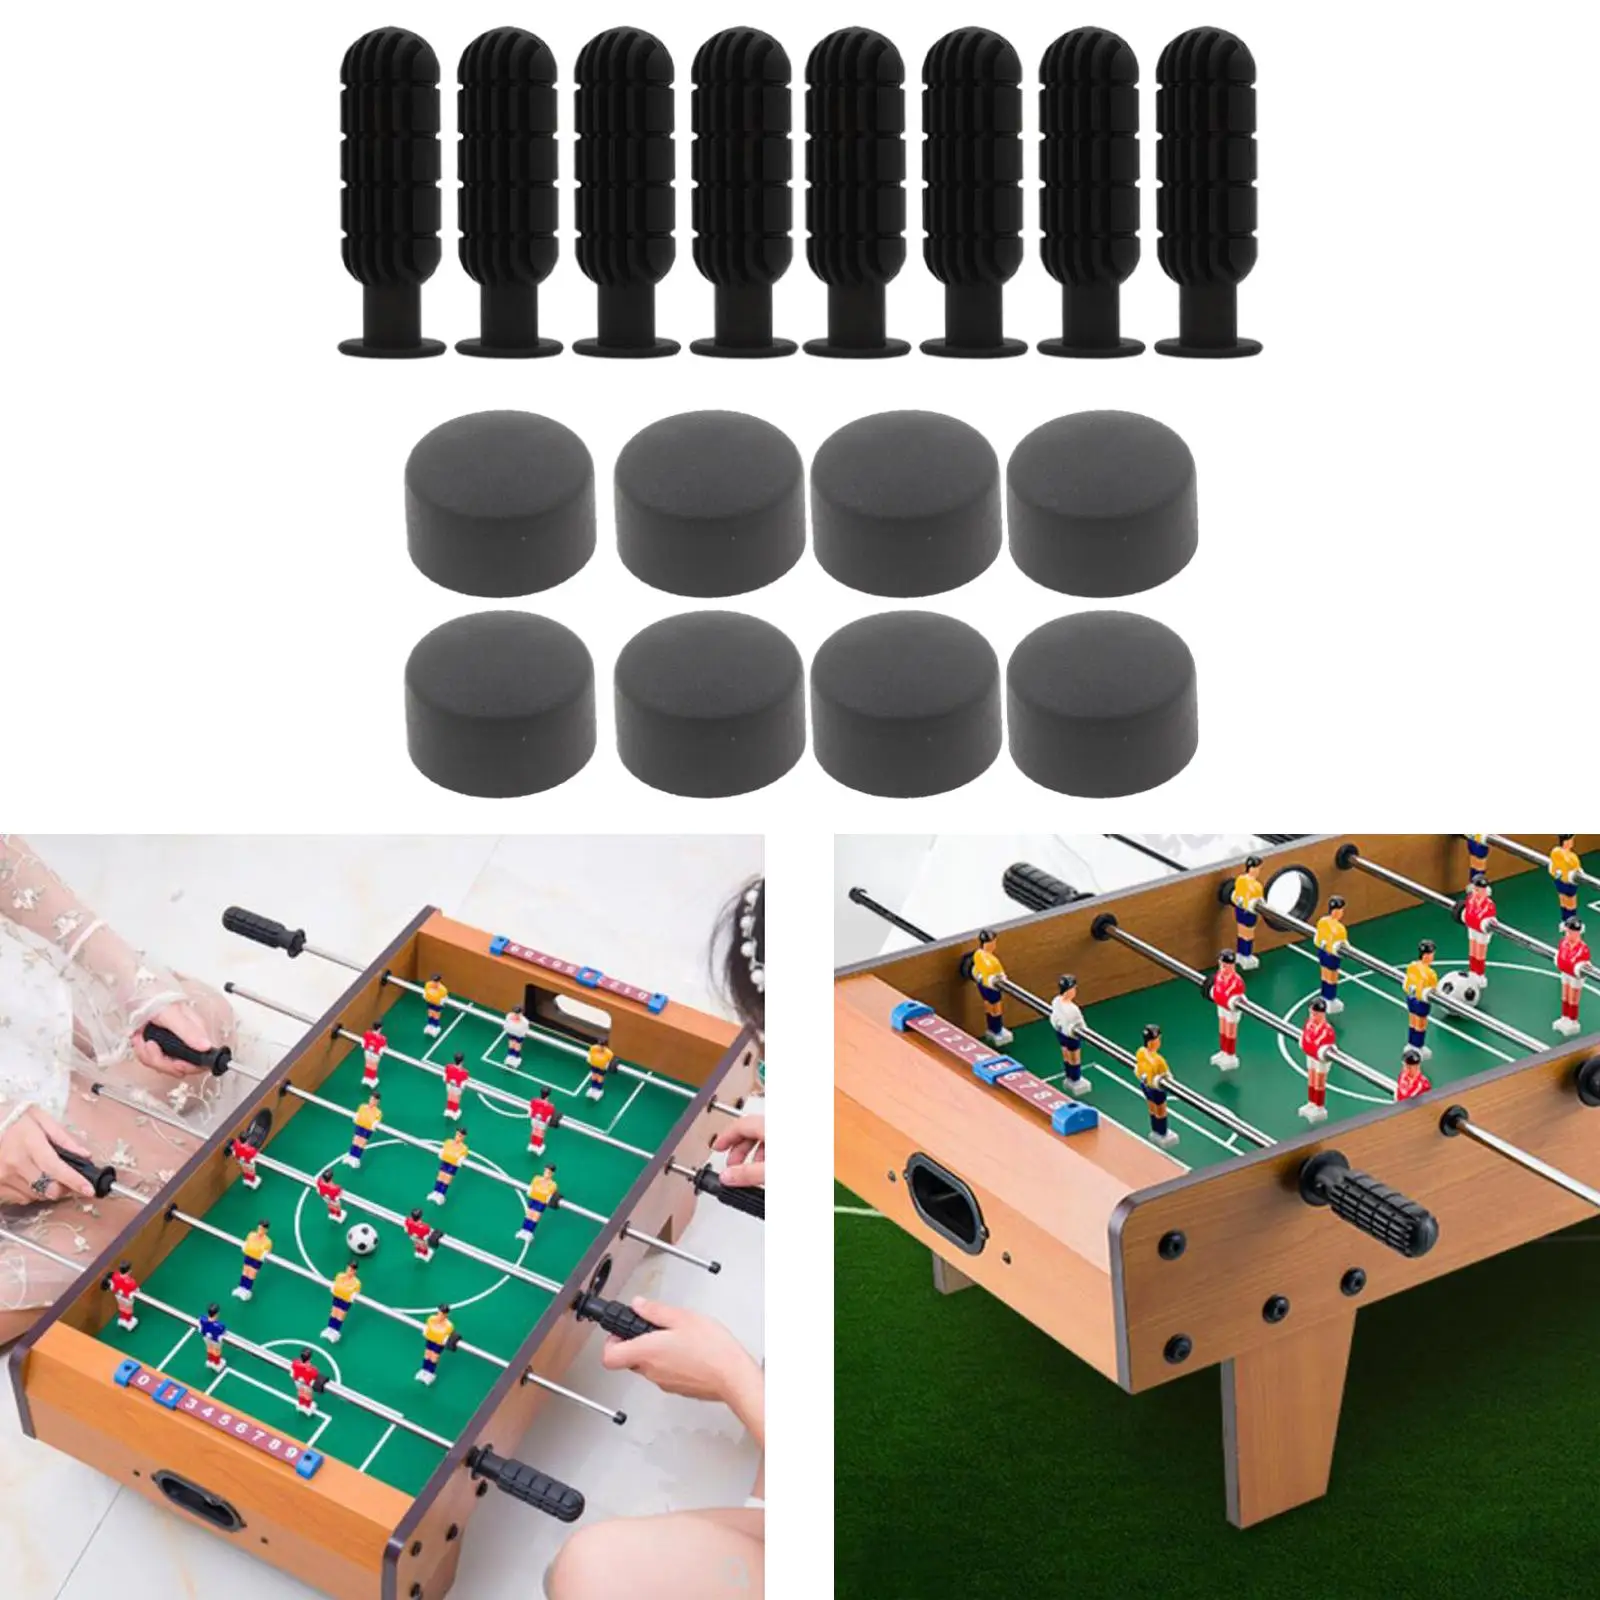 8 Pairs Durable Foosball Handle Replace Table Football Game Handle Grips and End